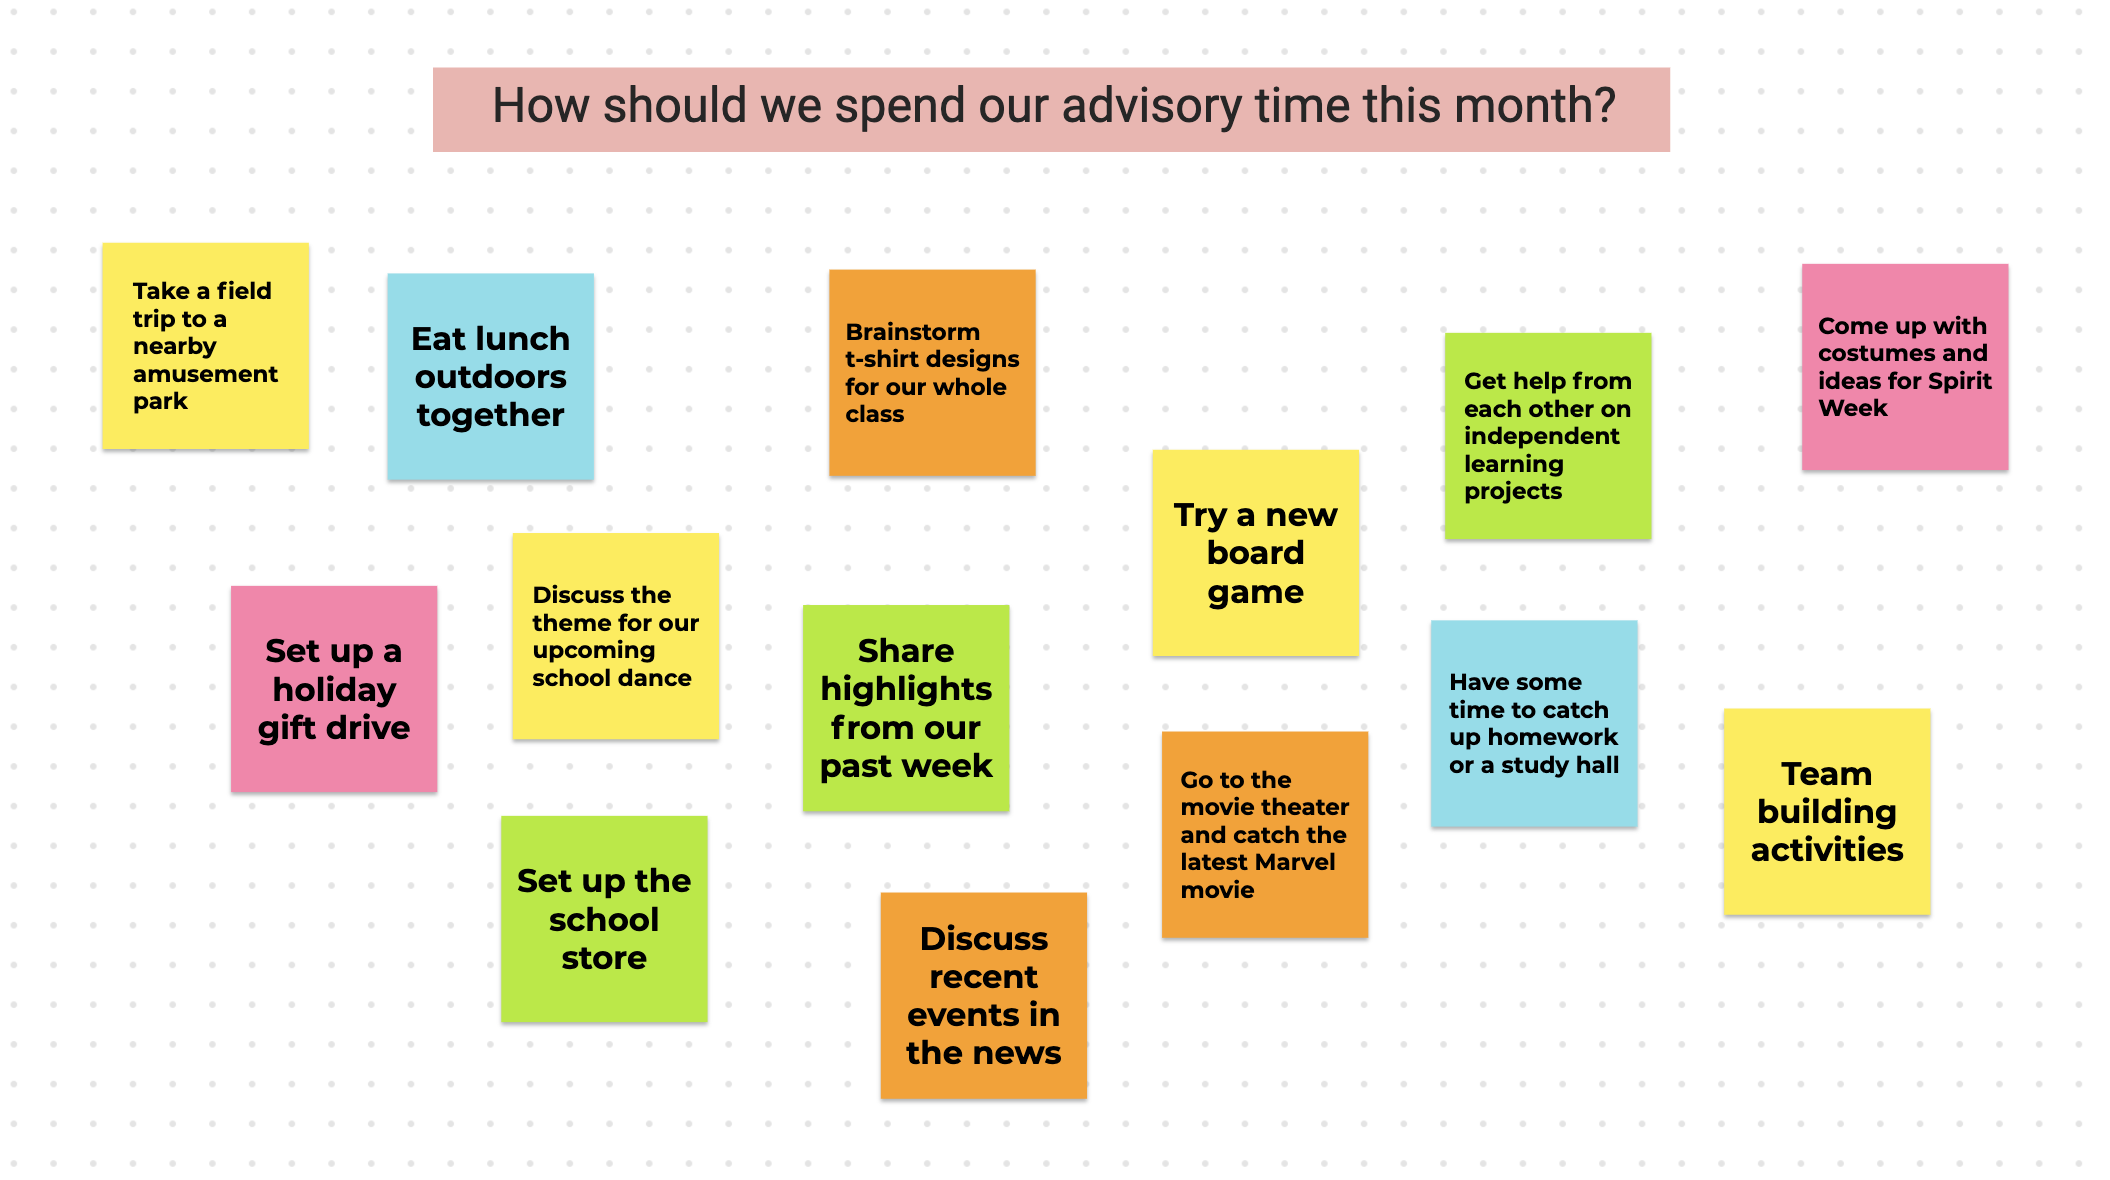 A digital white bulletin board with a question prompt that asks “How should we spend our advisory time this month?” along with 14 colorful post-it notes. Each post-it note has a suggestion or idea in response to the prompt.